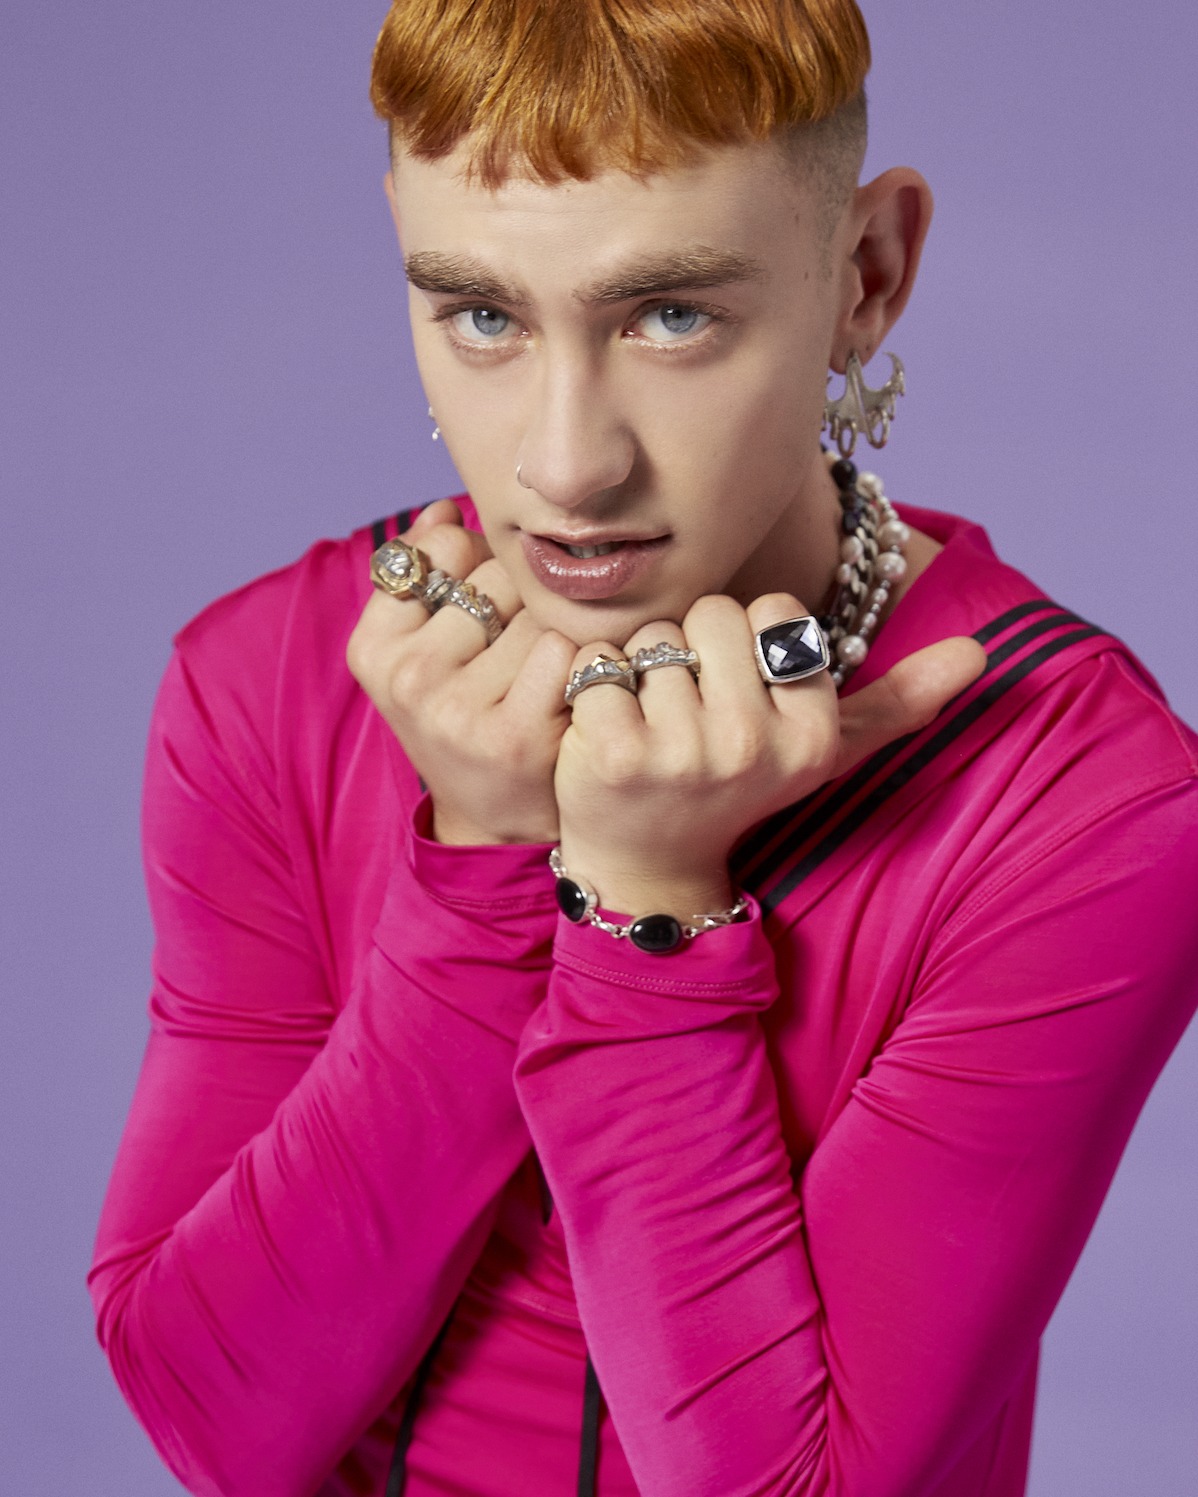 Years & Years’ Olly Alexander makes his mystical fantasy a dance-pop reality